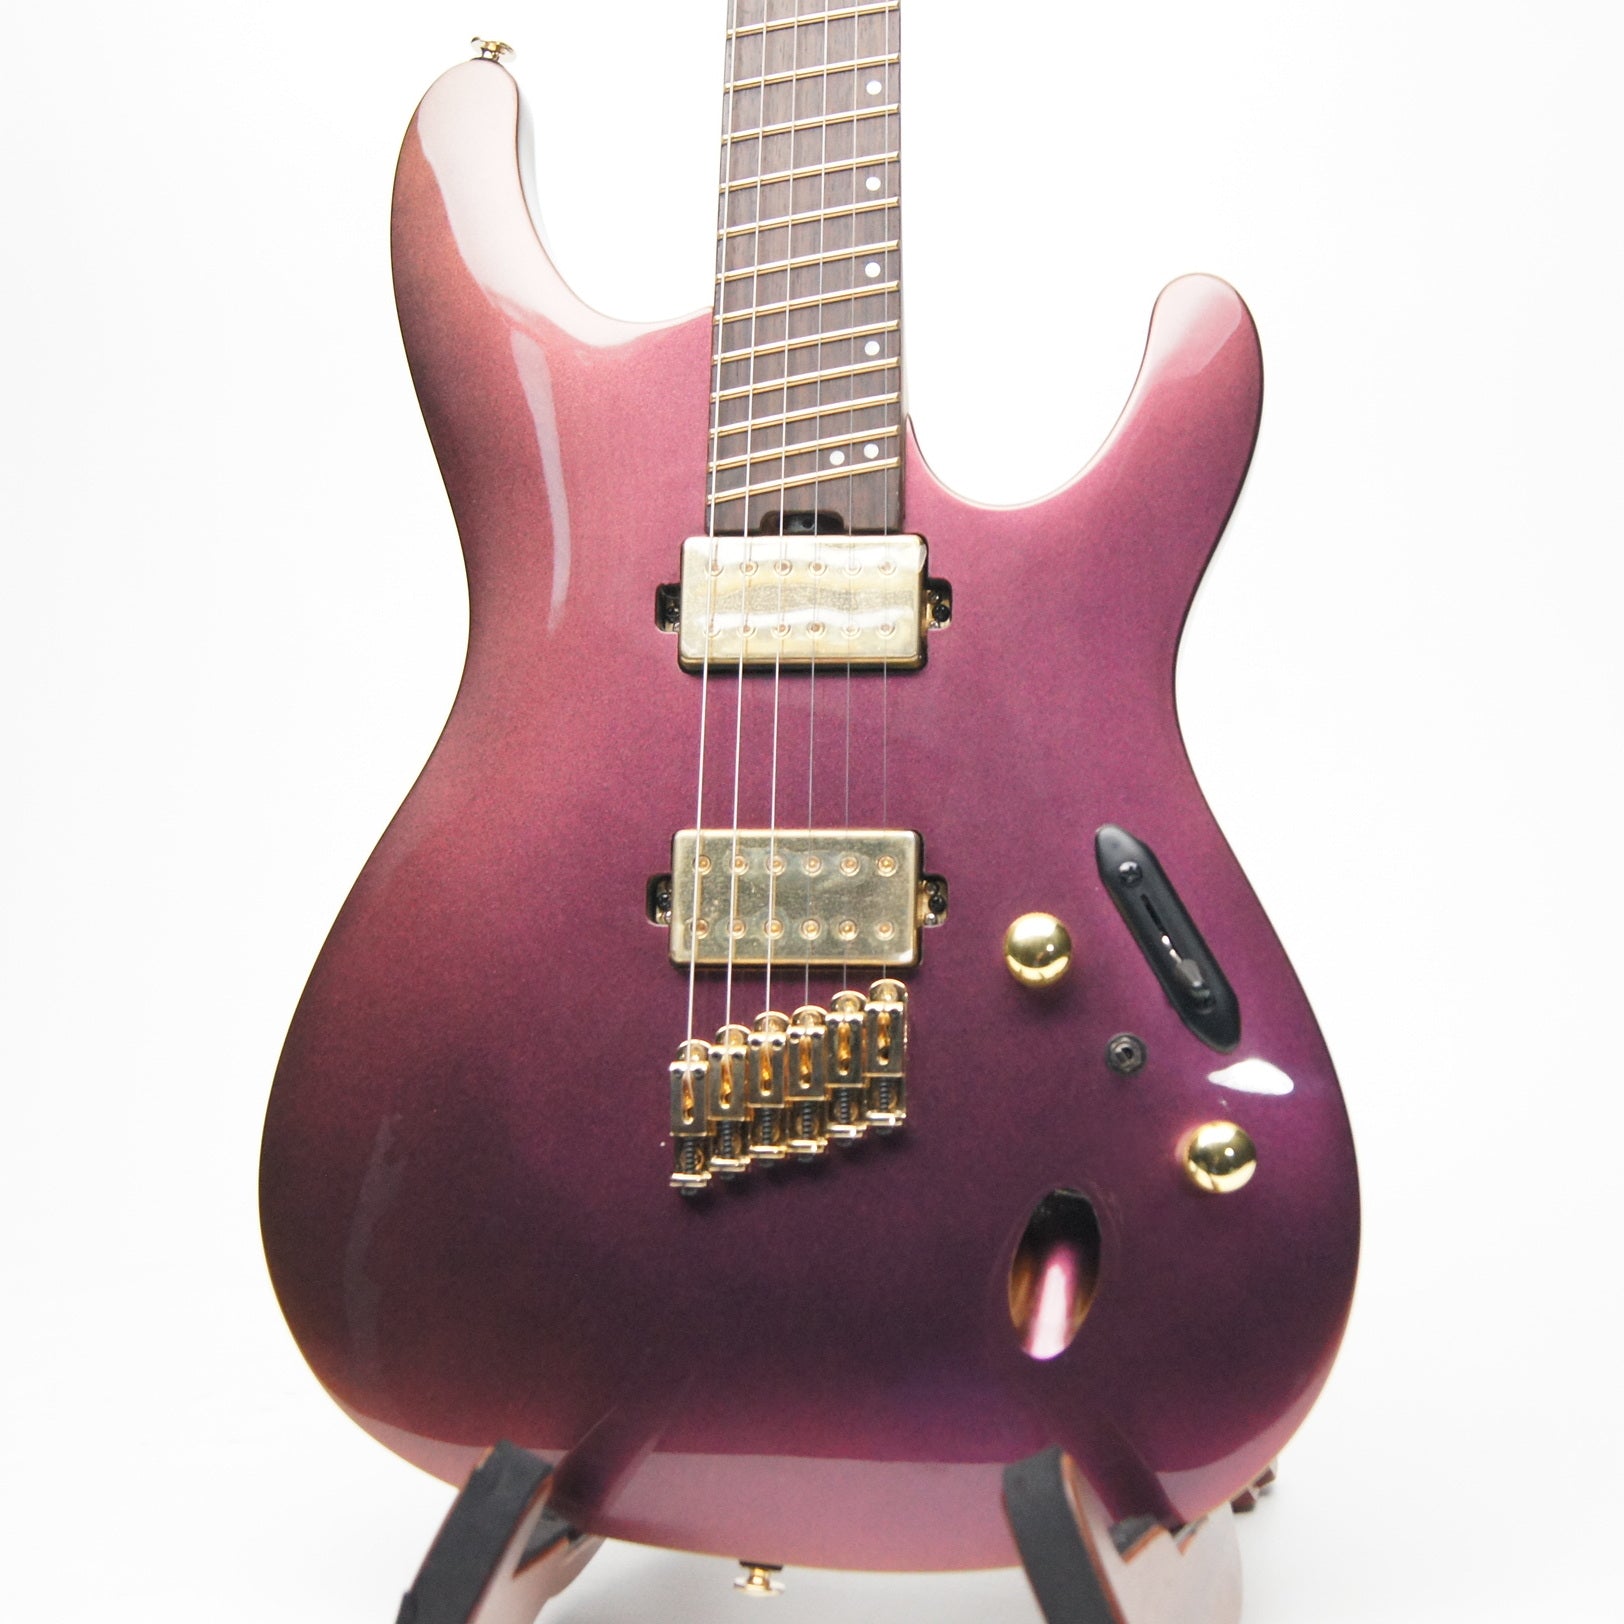 Ibanez SML721 Multi-scale Electric Guitar - Rose Gold Chameleon